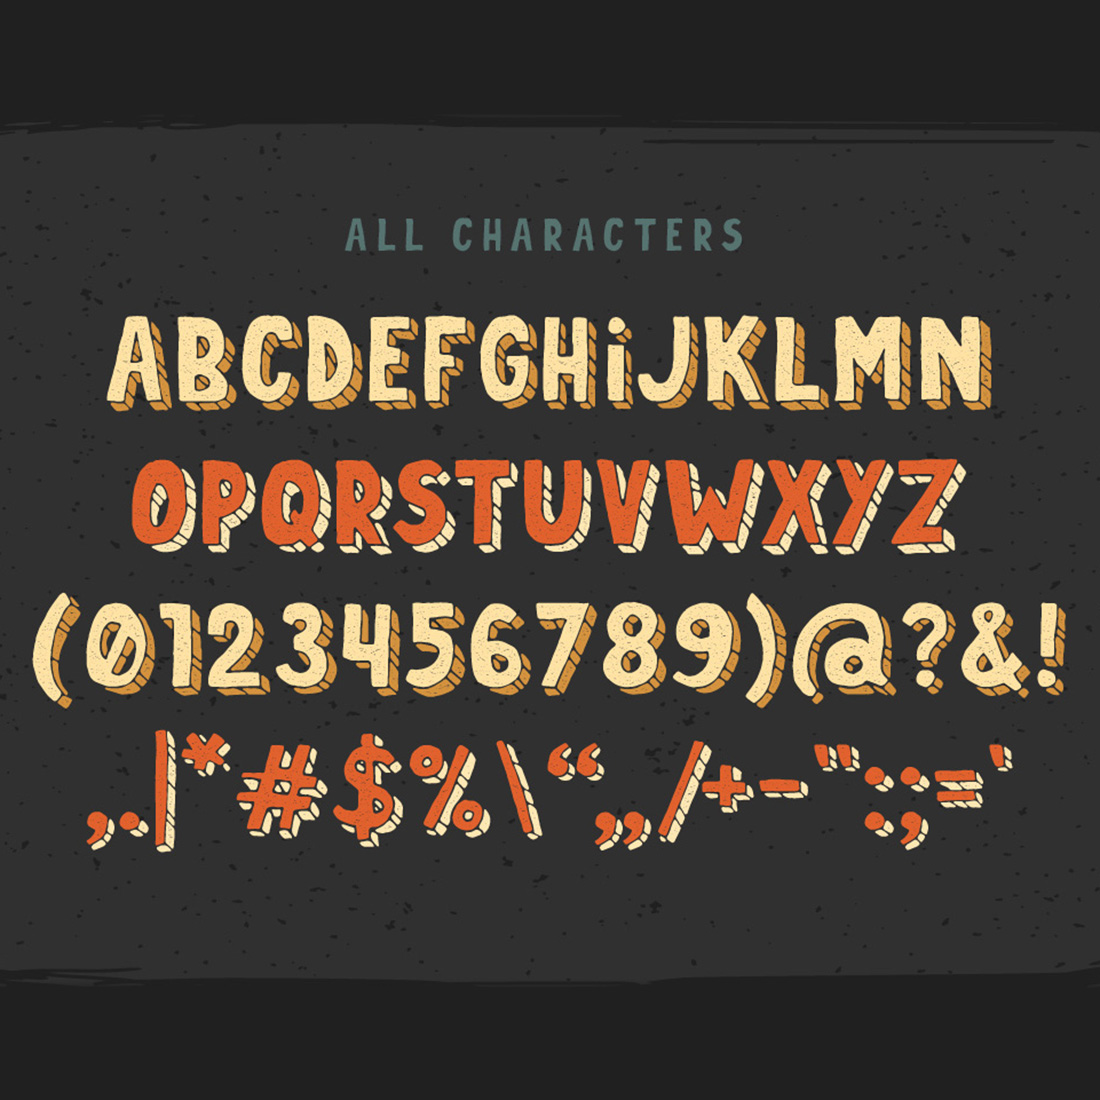 An image showcasing all the characters of the adorable Dirty Cartoon font.